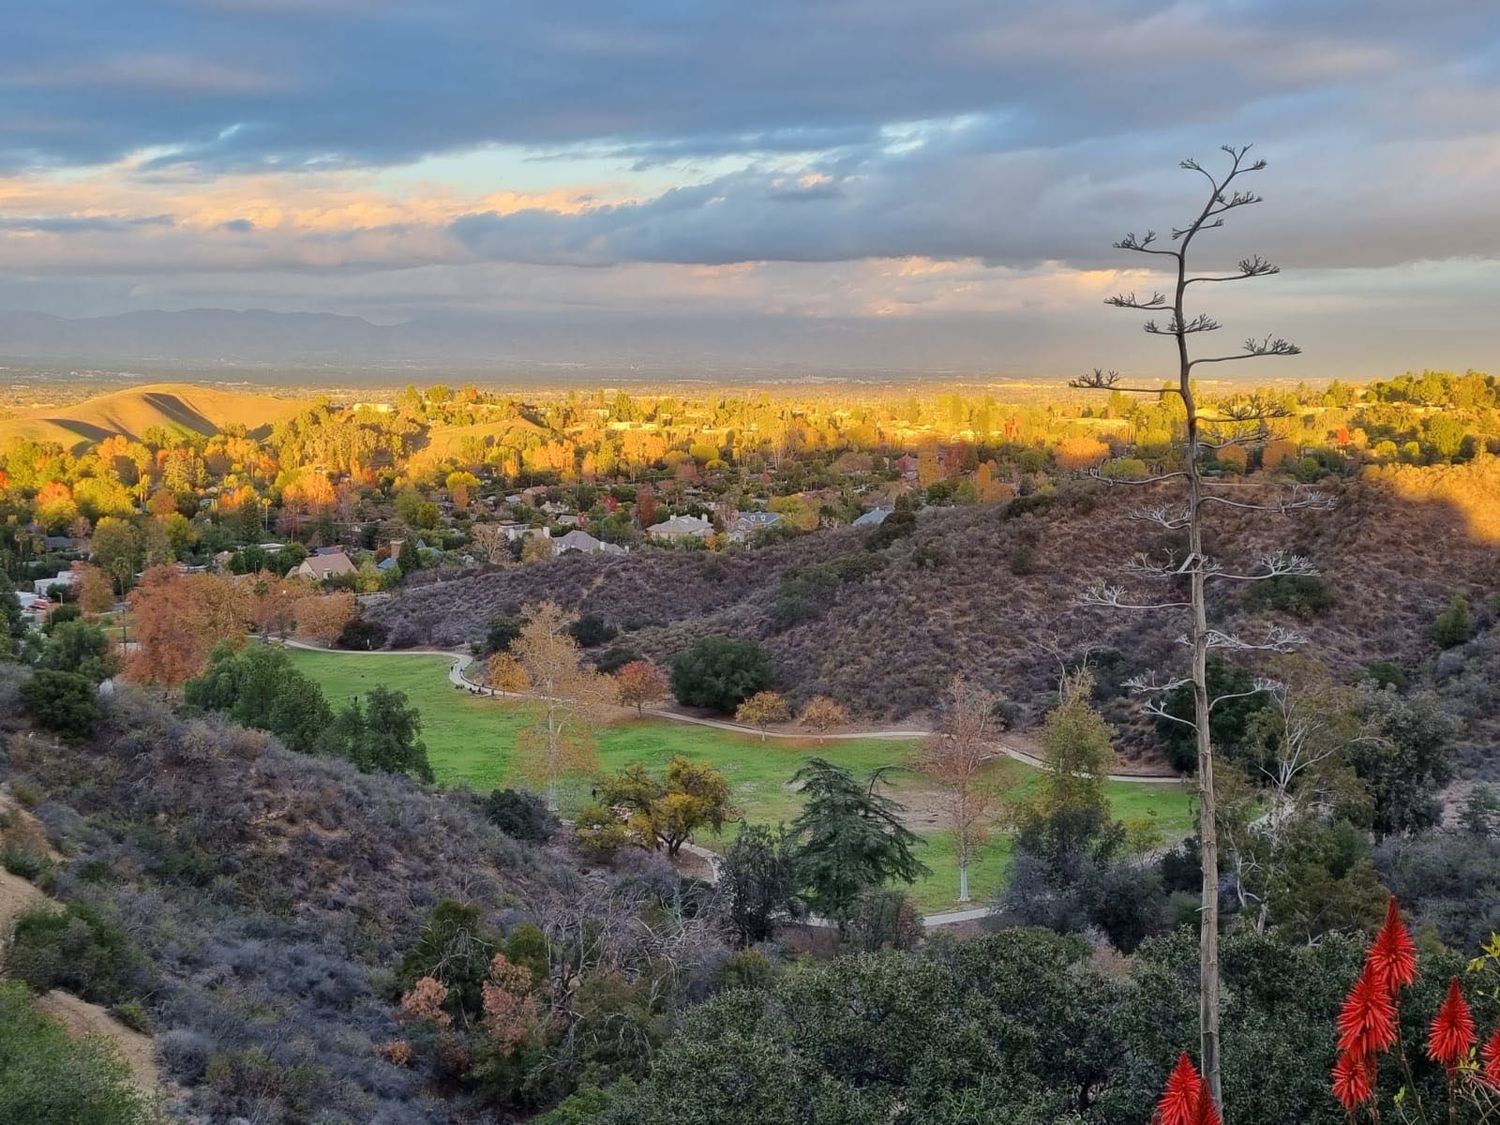 Gallery Photo of View of our direct service area, the beautiful San Fernando Valley!